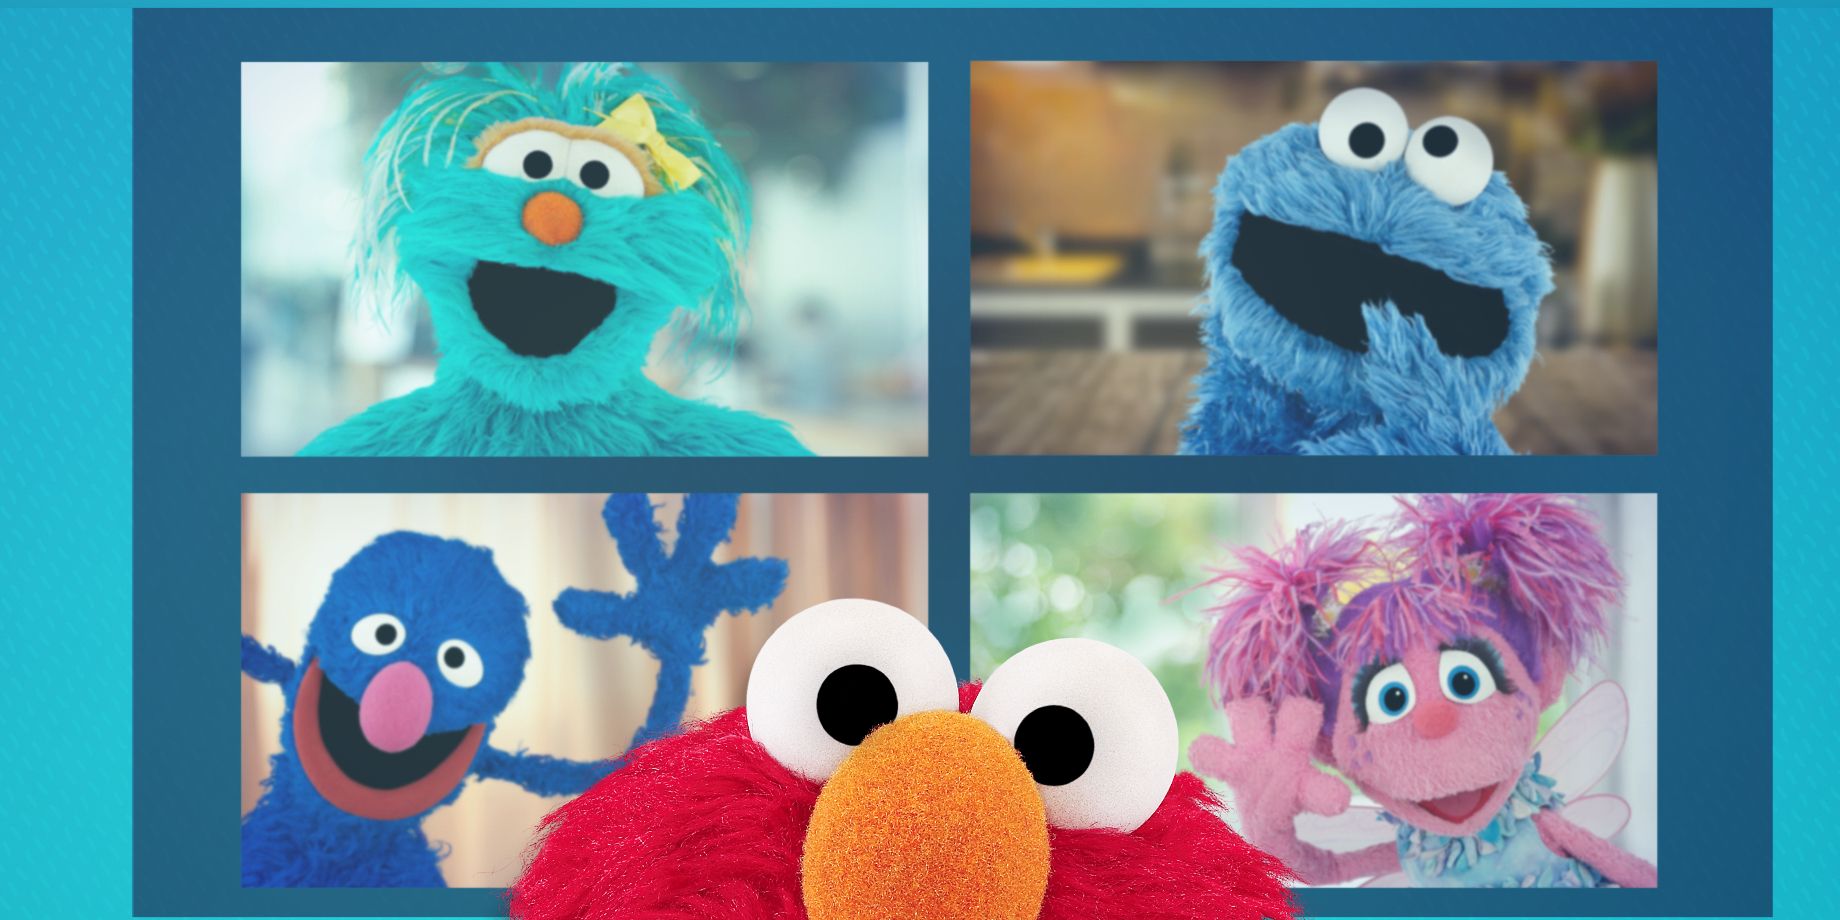 A zoom-call like interface showing Sesame Street characters